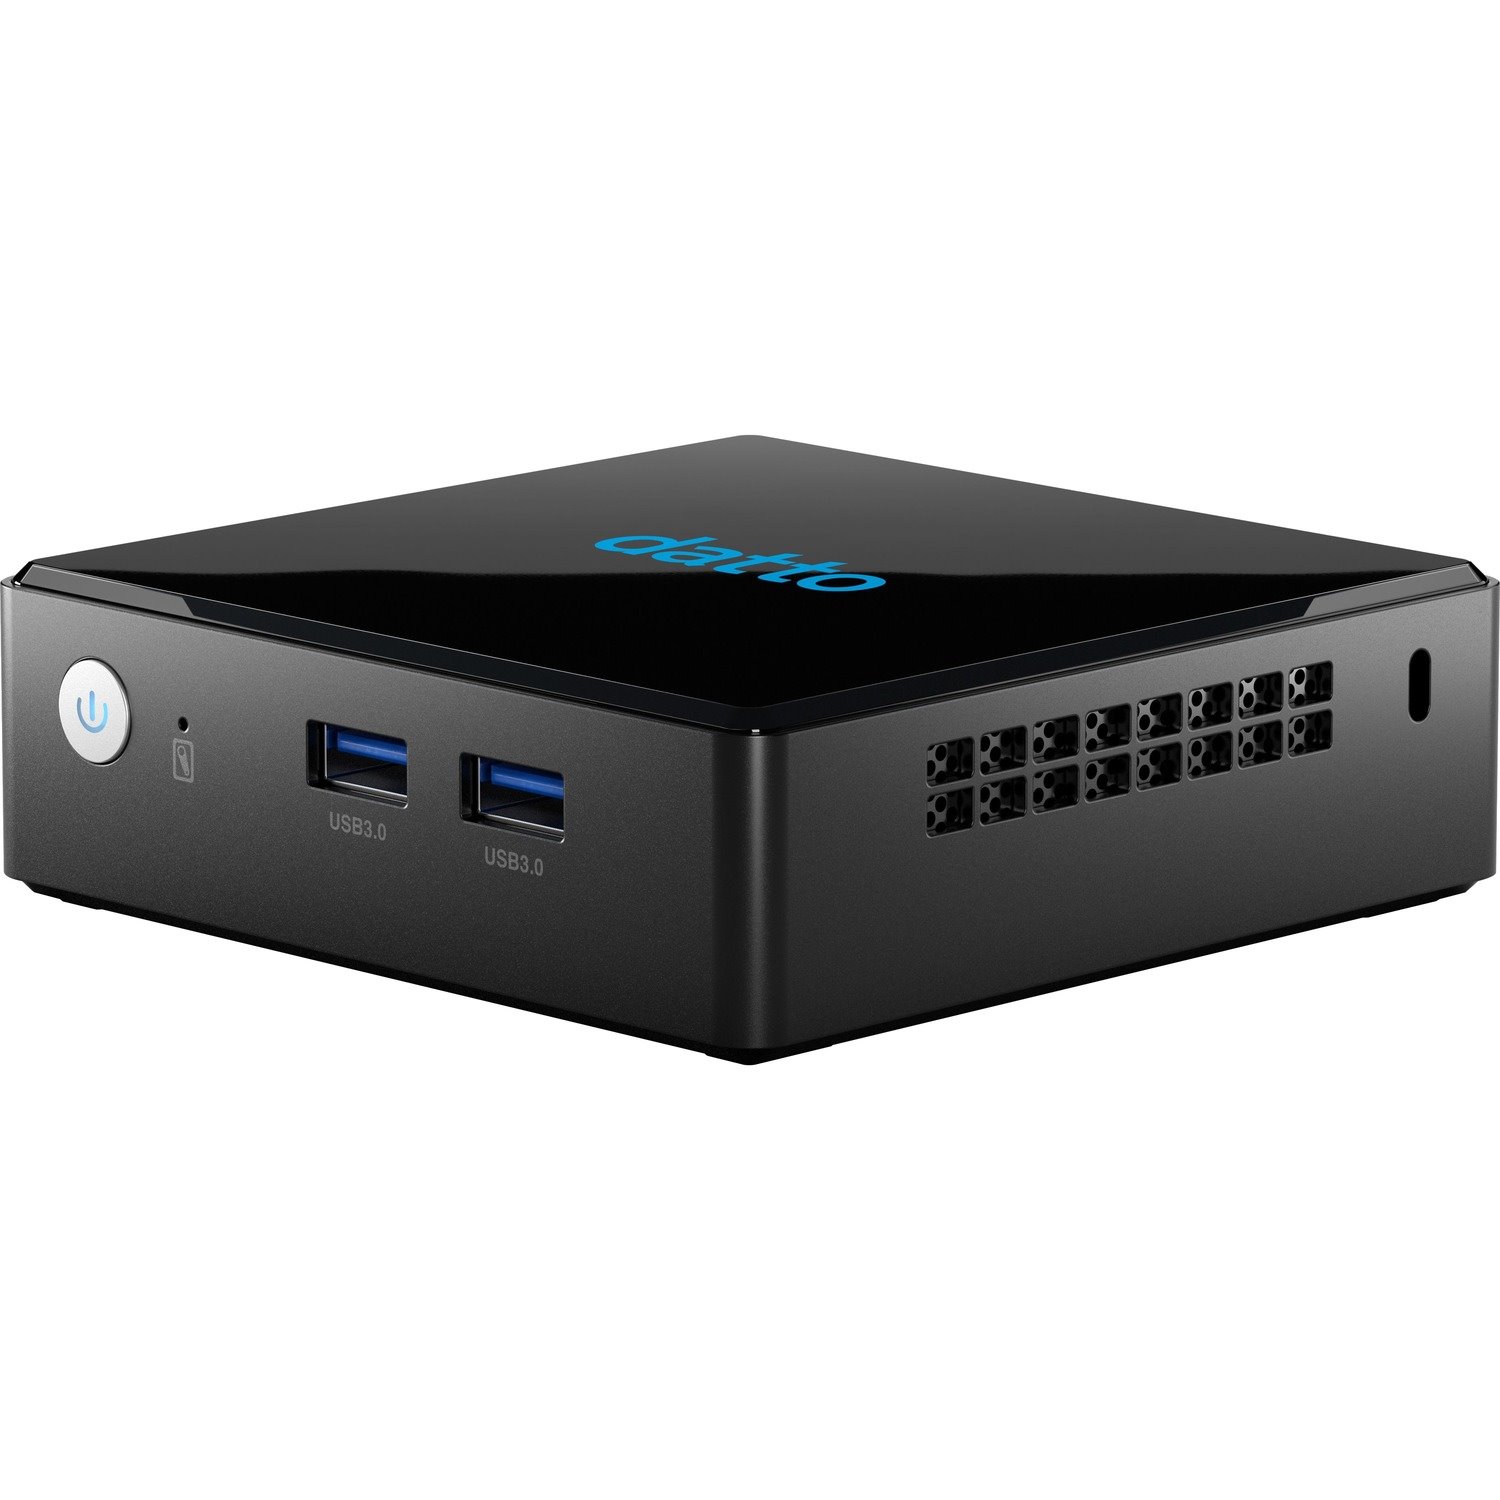 Datto Siris 4 X 1TB Backup, Continuity & Disaster Recovery Appliance